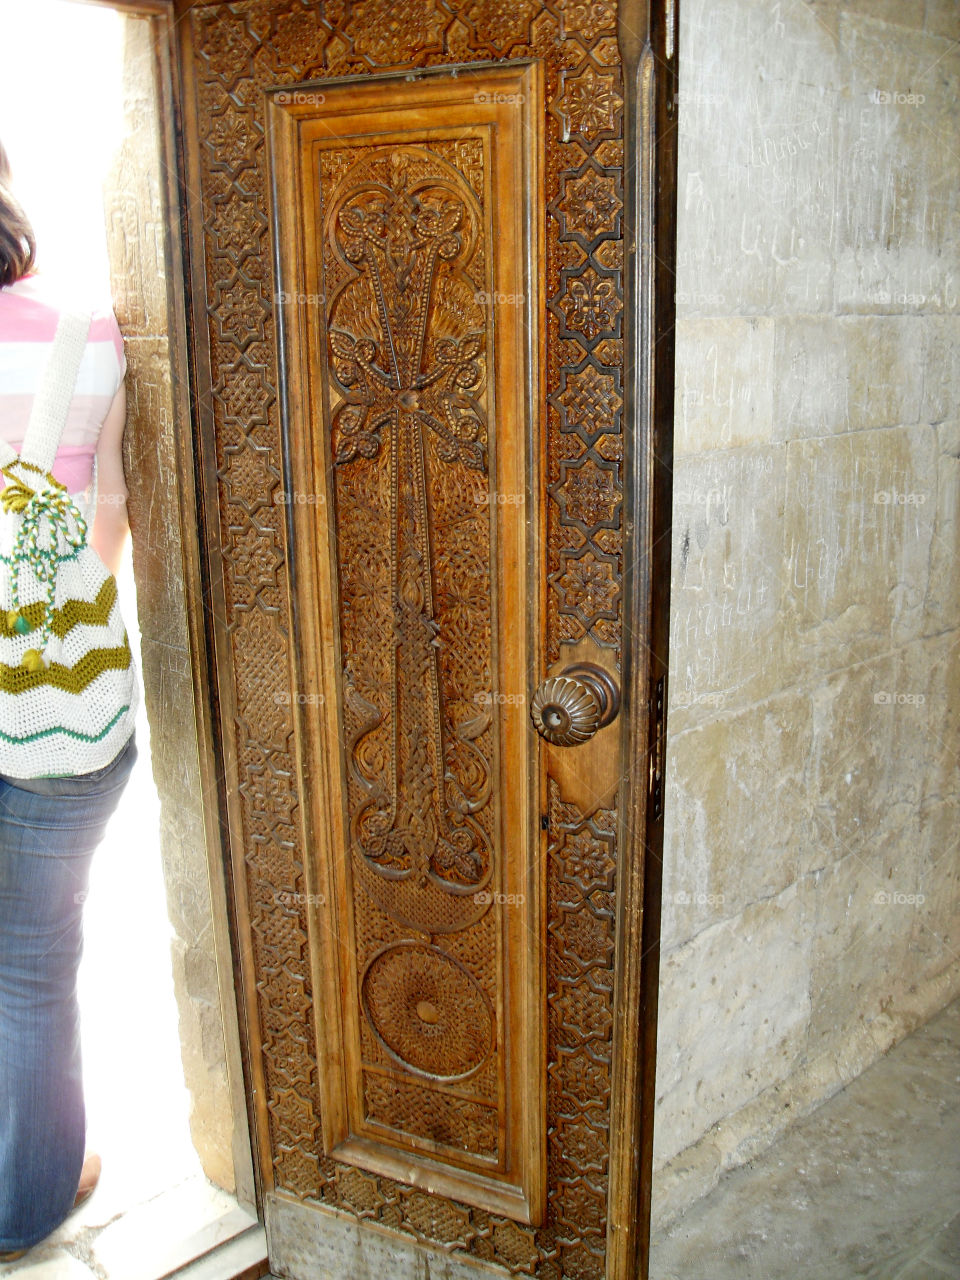 Church door with carving